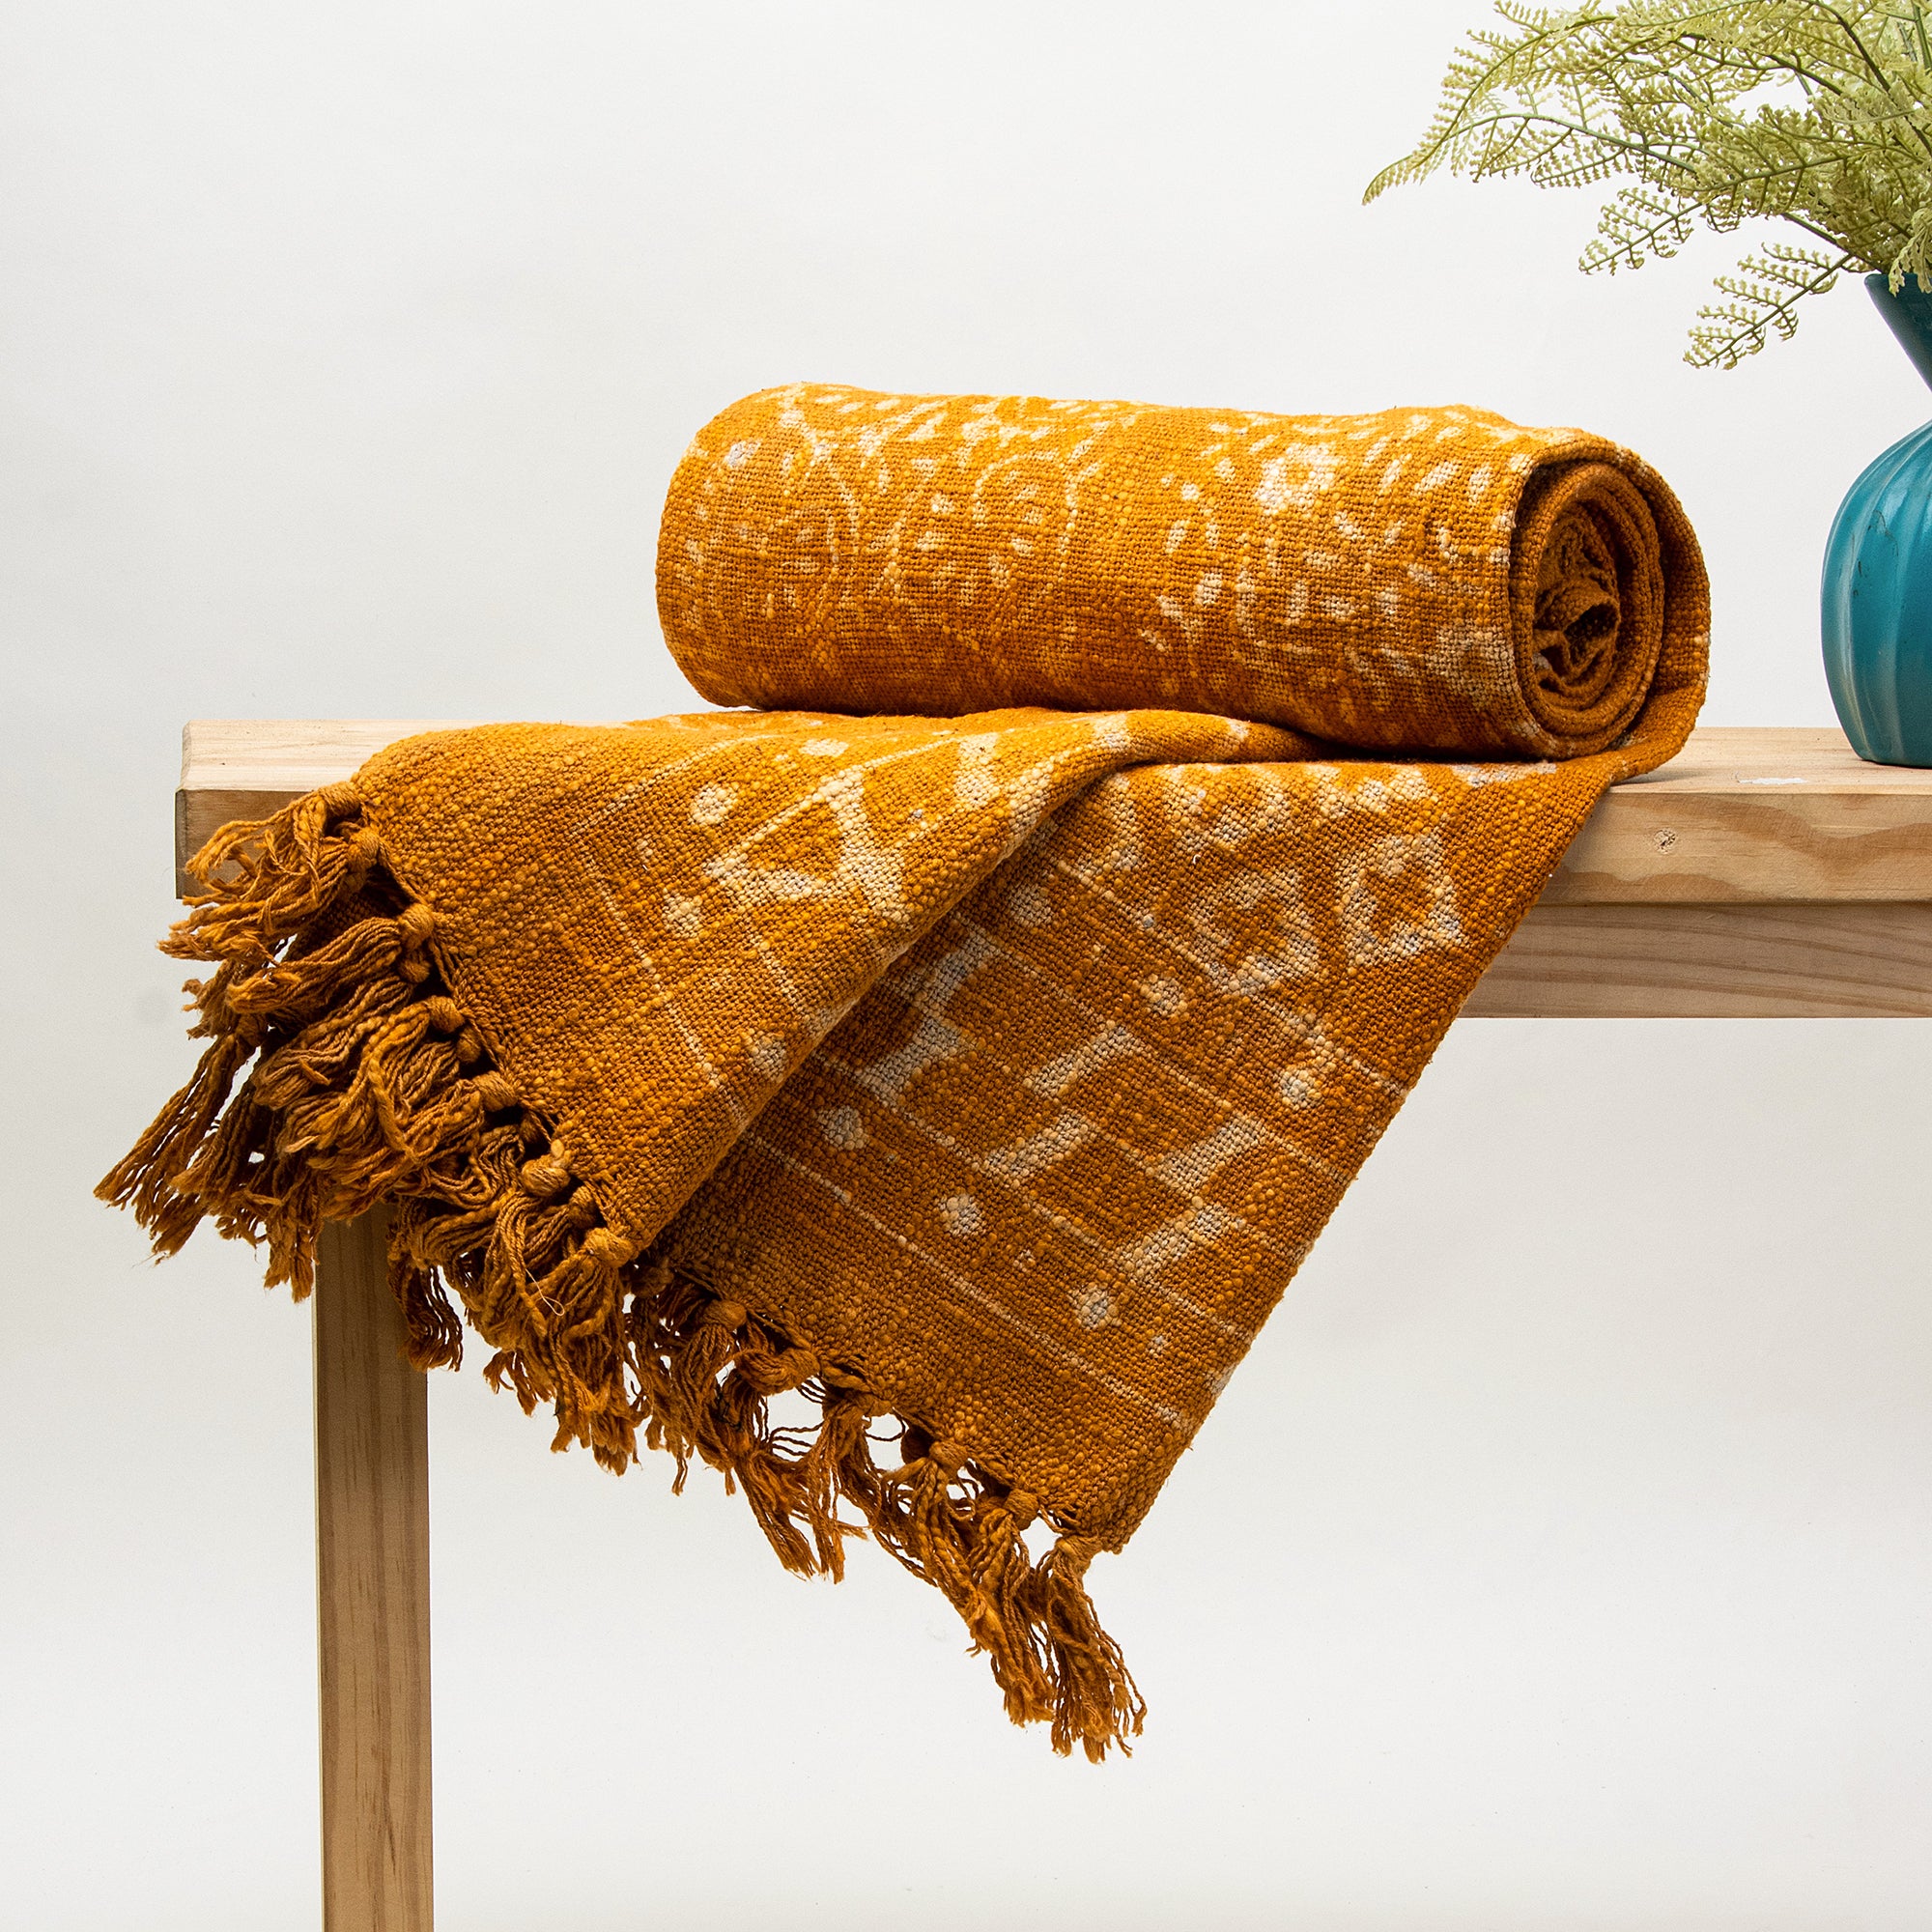 Mustard Yellow Soft Cotton Throw Blankets for Home Decor